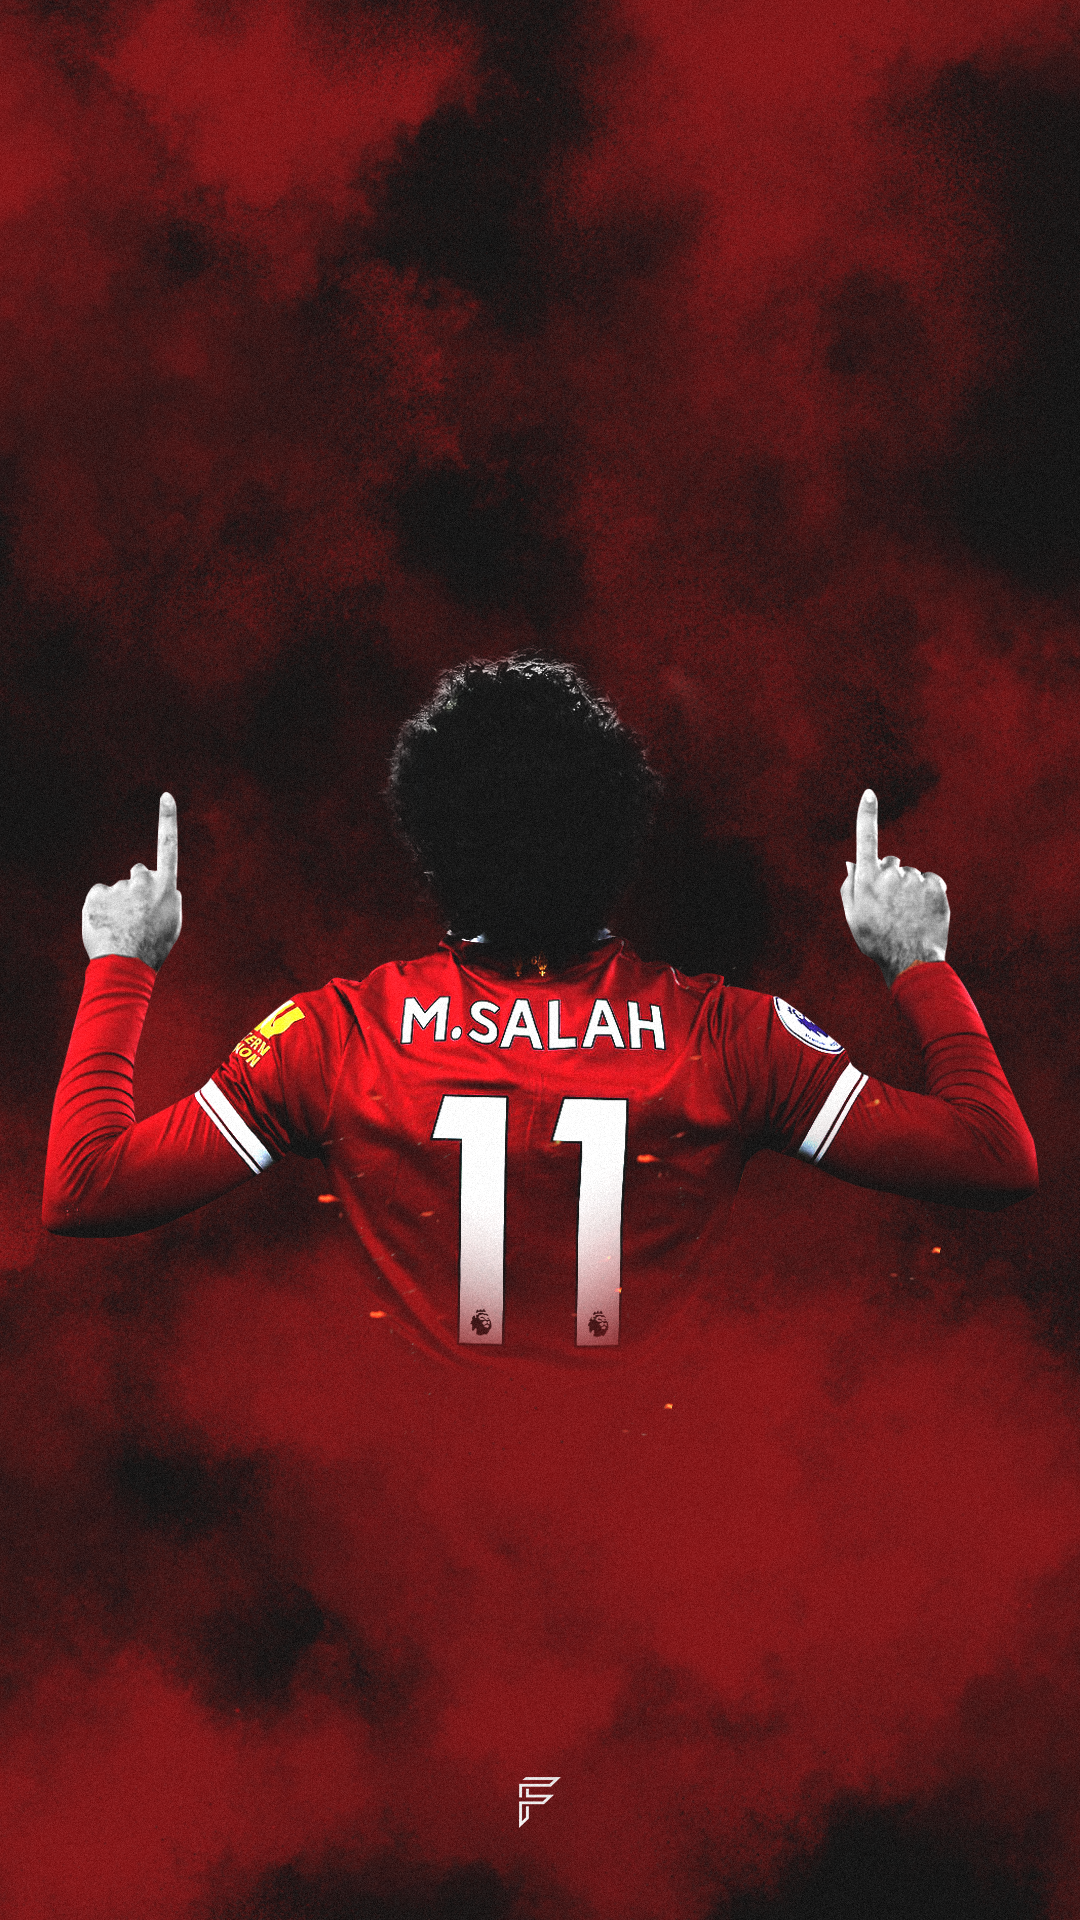 Download wallpaper 840x1336 mohamed salah sports footballer iphone 5  iphone 5s iphone 5c ipod touch 840x1336 hd background 9508